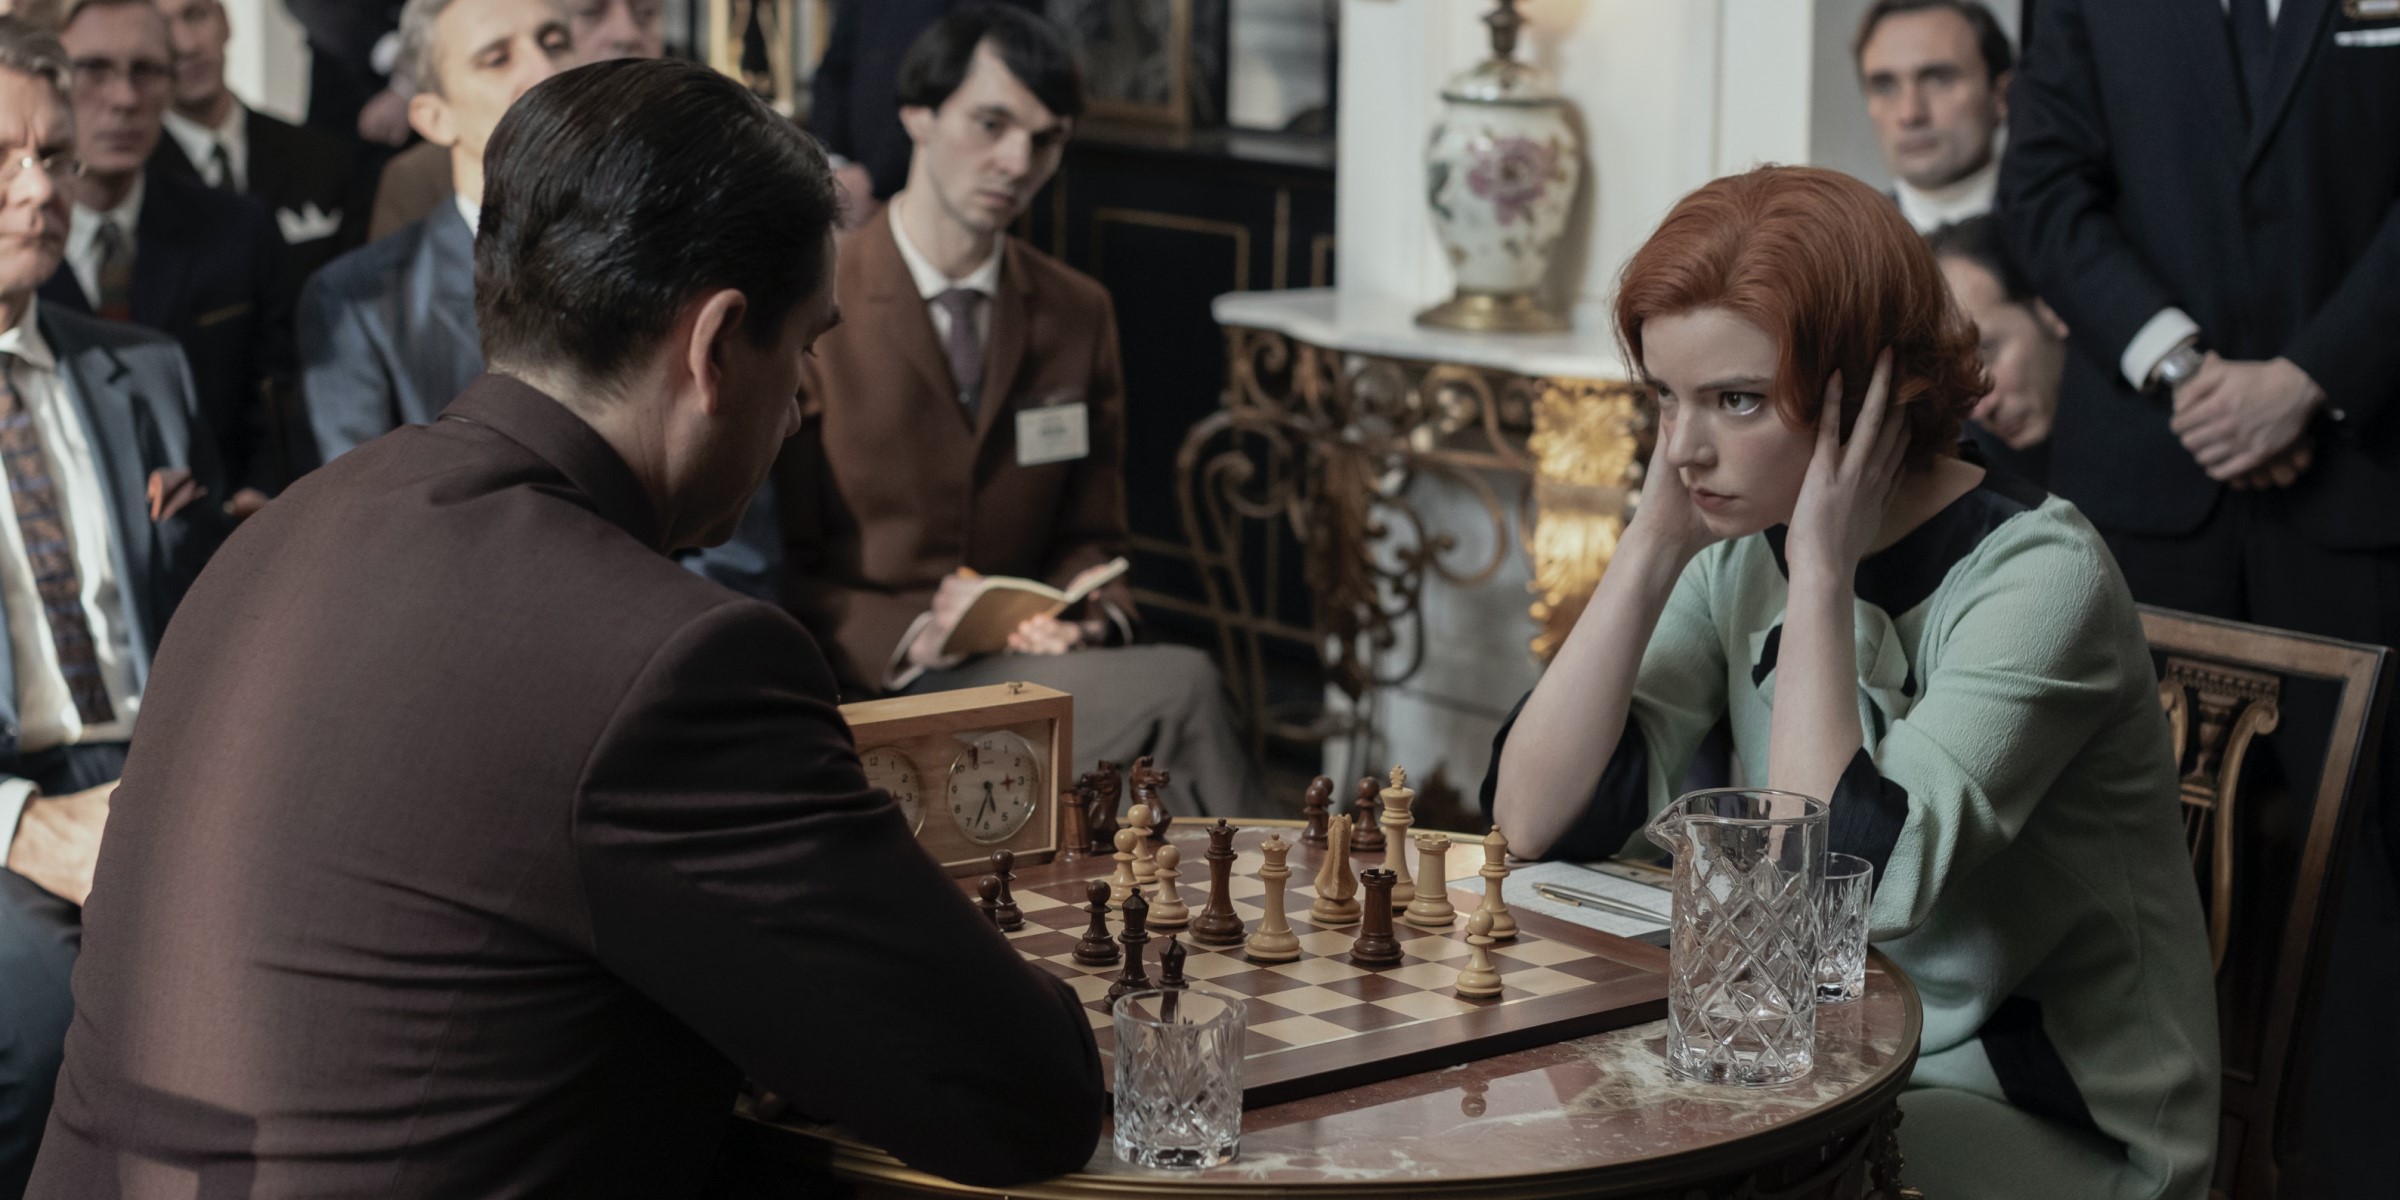 Beth Harmon: Chess Prodigy From Netflix's The Queens Gambit